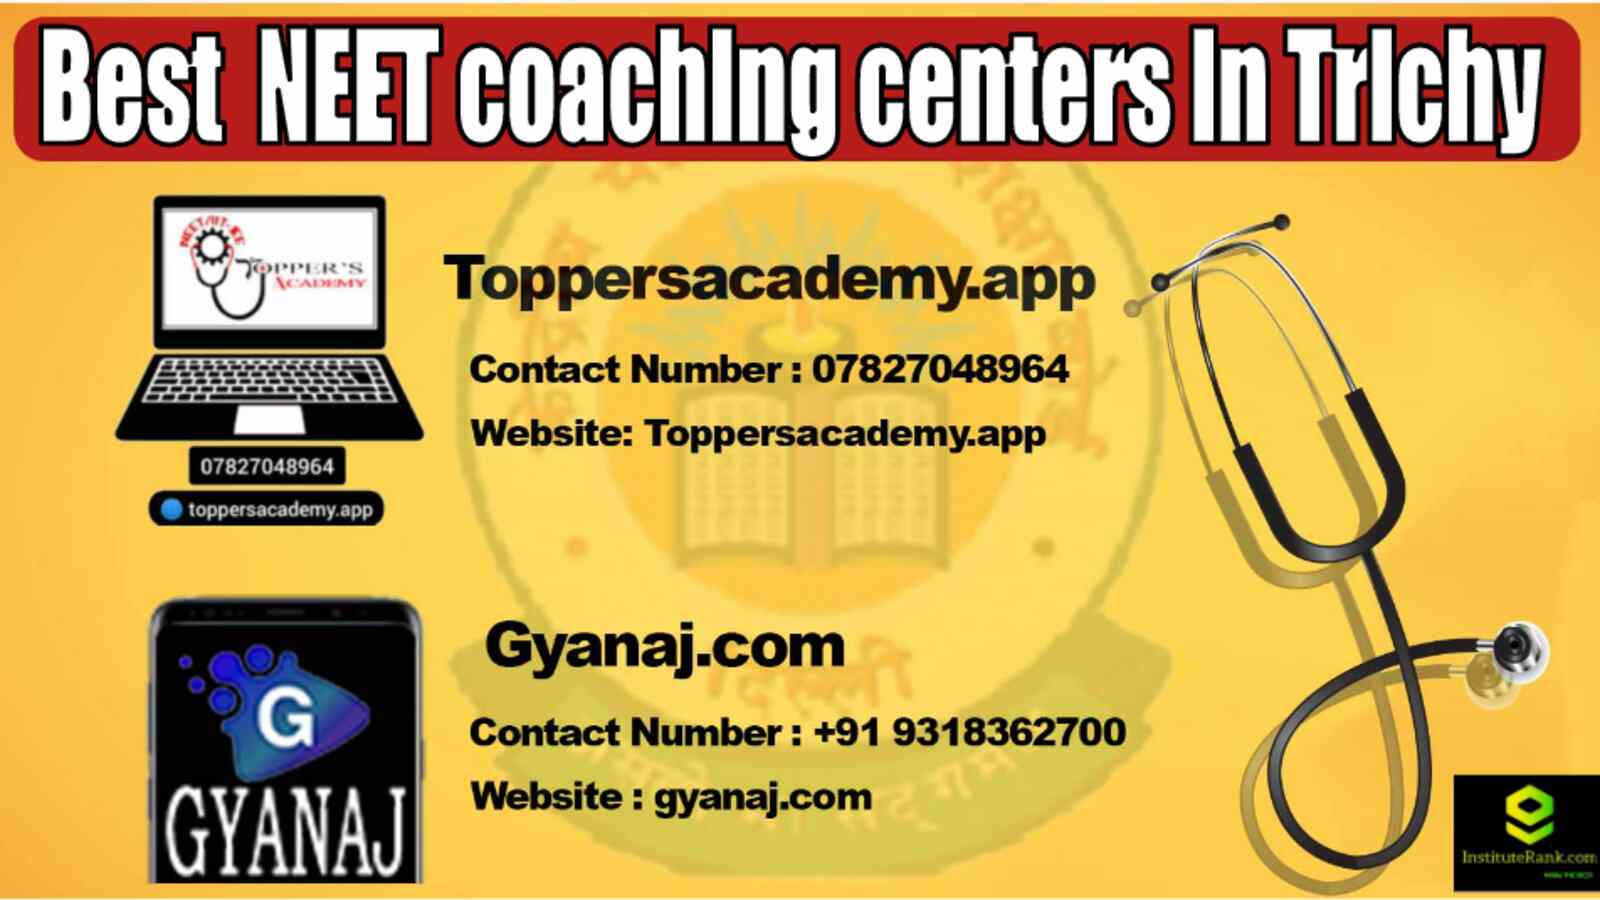 Best 10 NEET coaching centres in Trichy